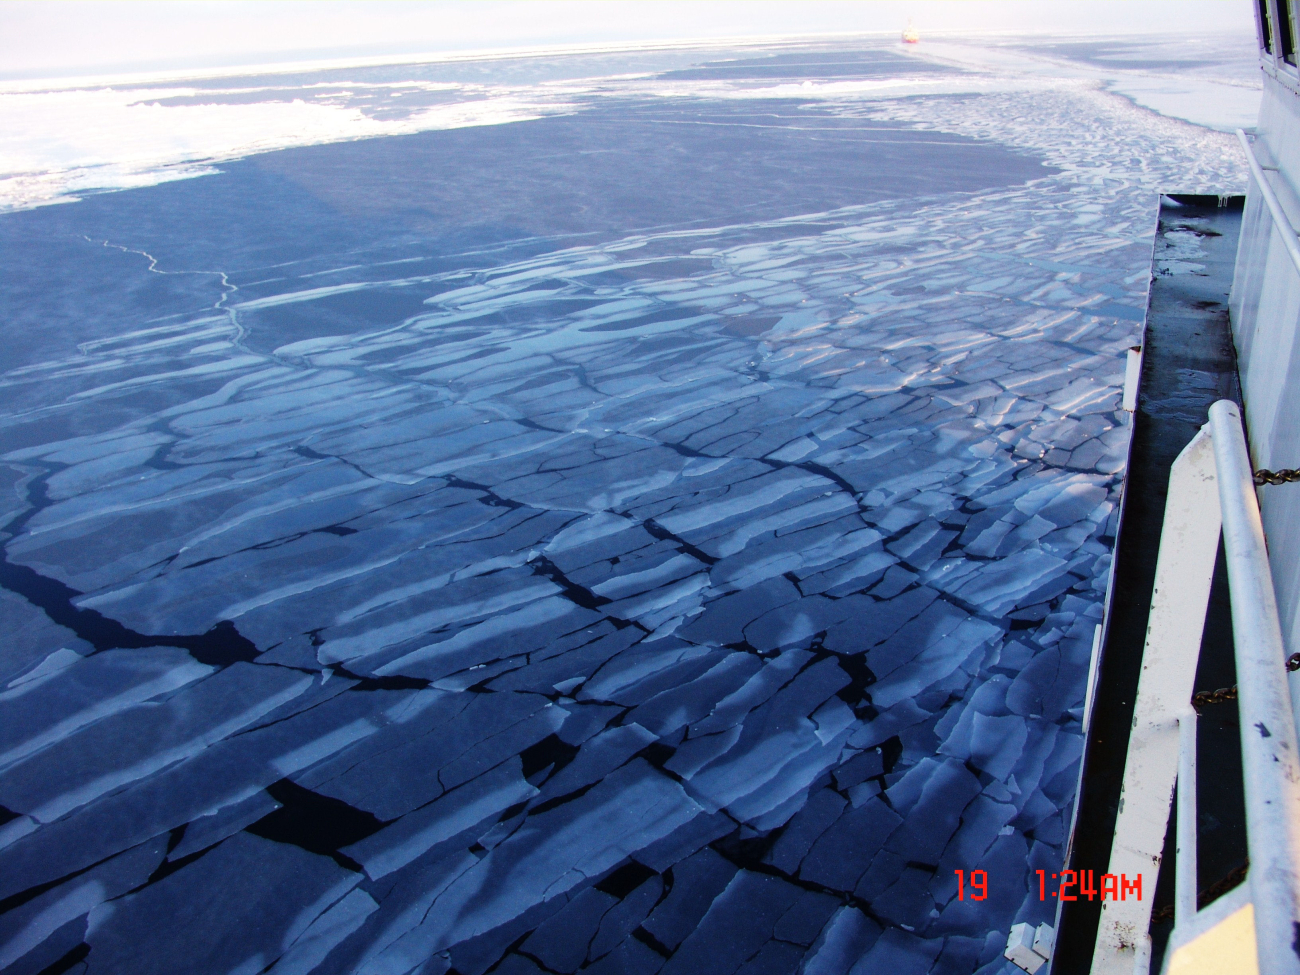 New grey ice cracking into rectangular sheets as the CGC HEALY plowsthrough new ice